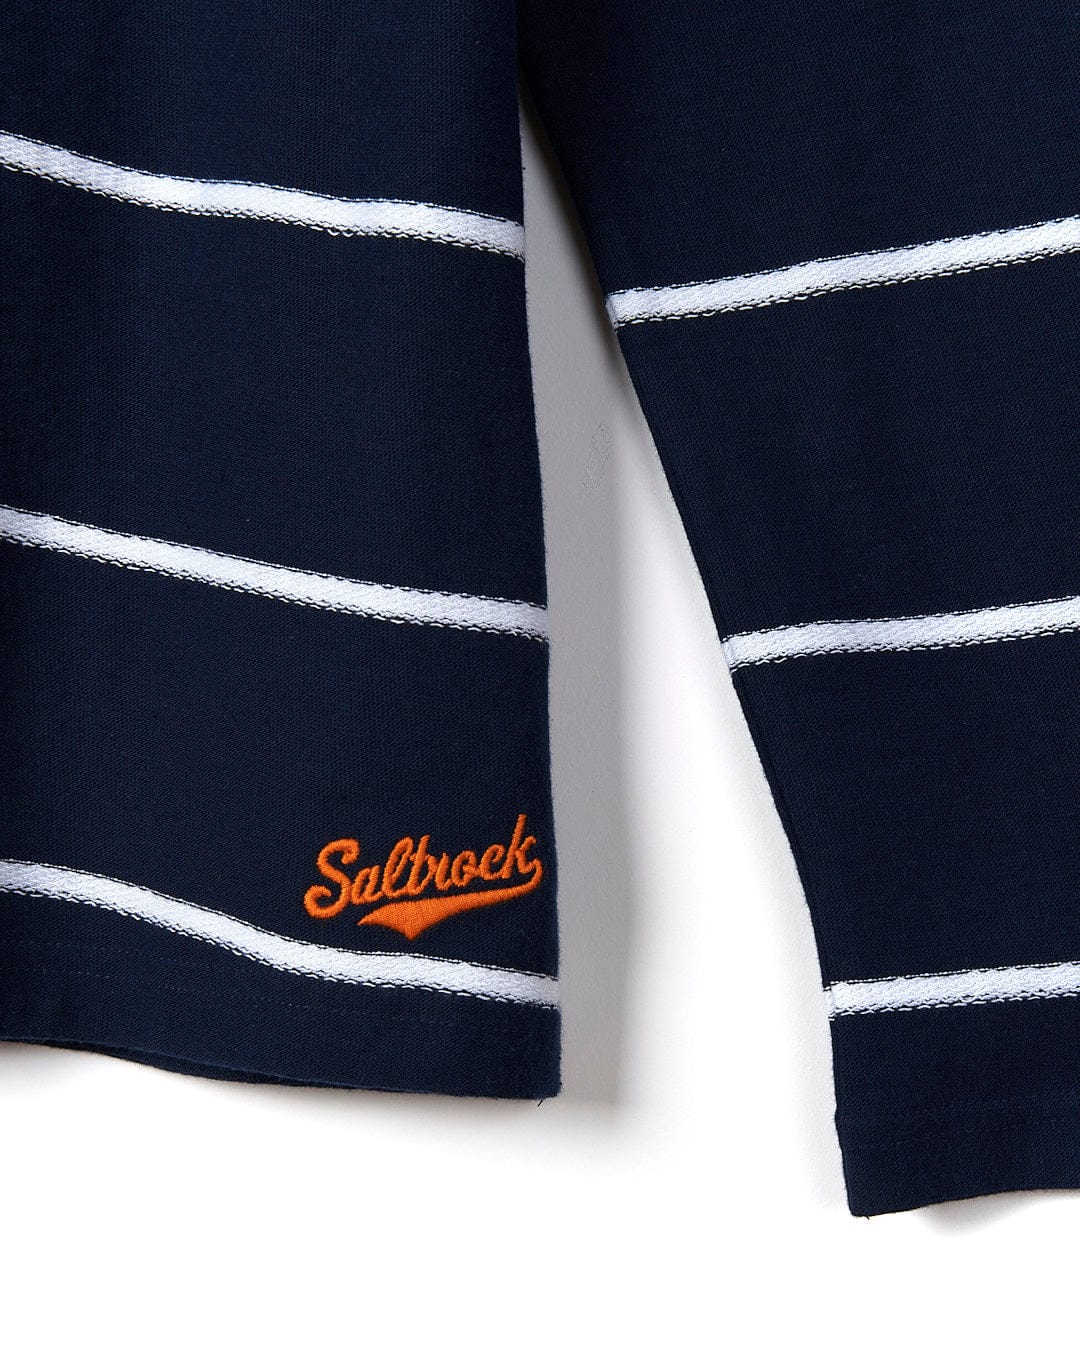 A Saltrock - Womens Striped Long Sleeve Tee - Blue with the word surfrocks on it.